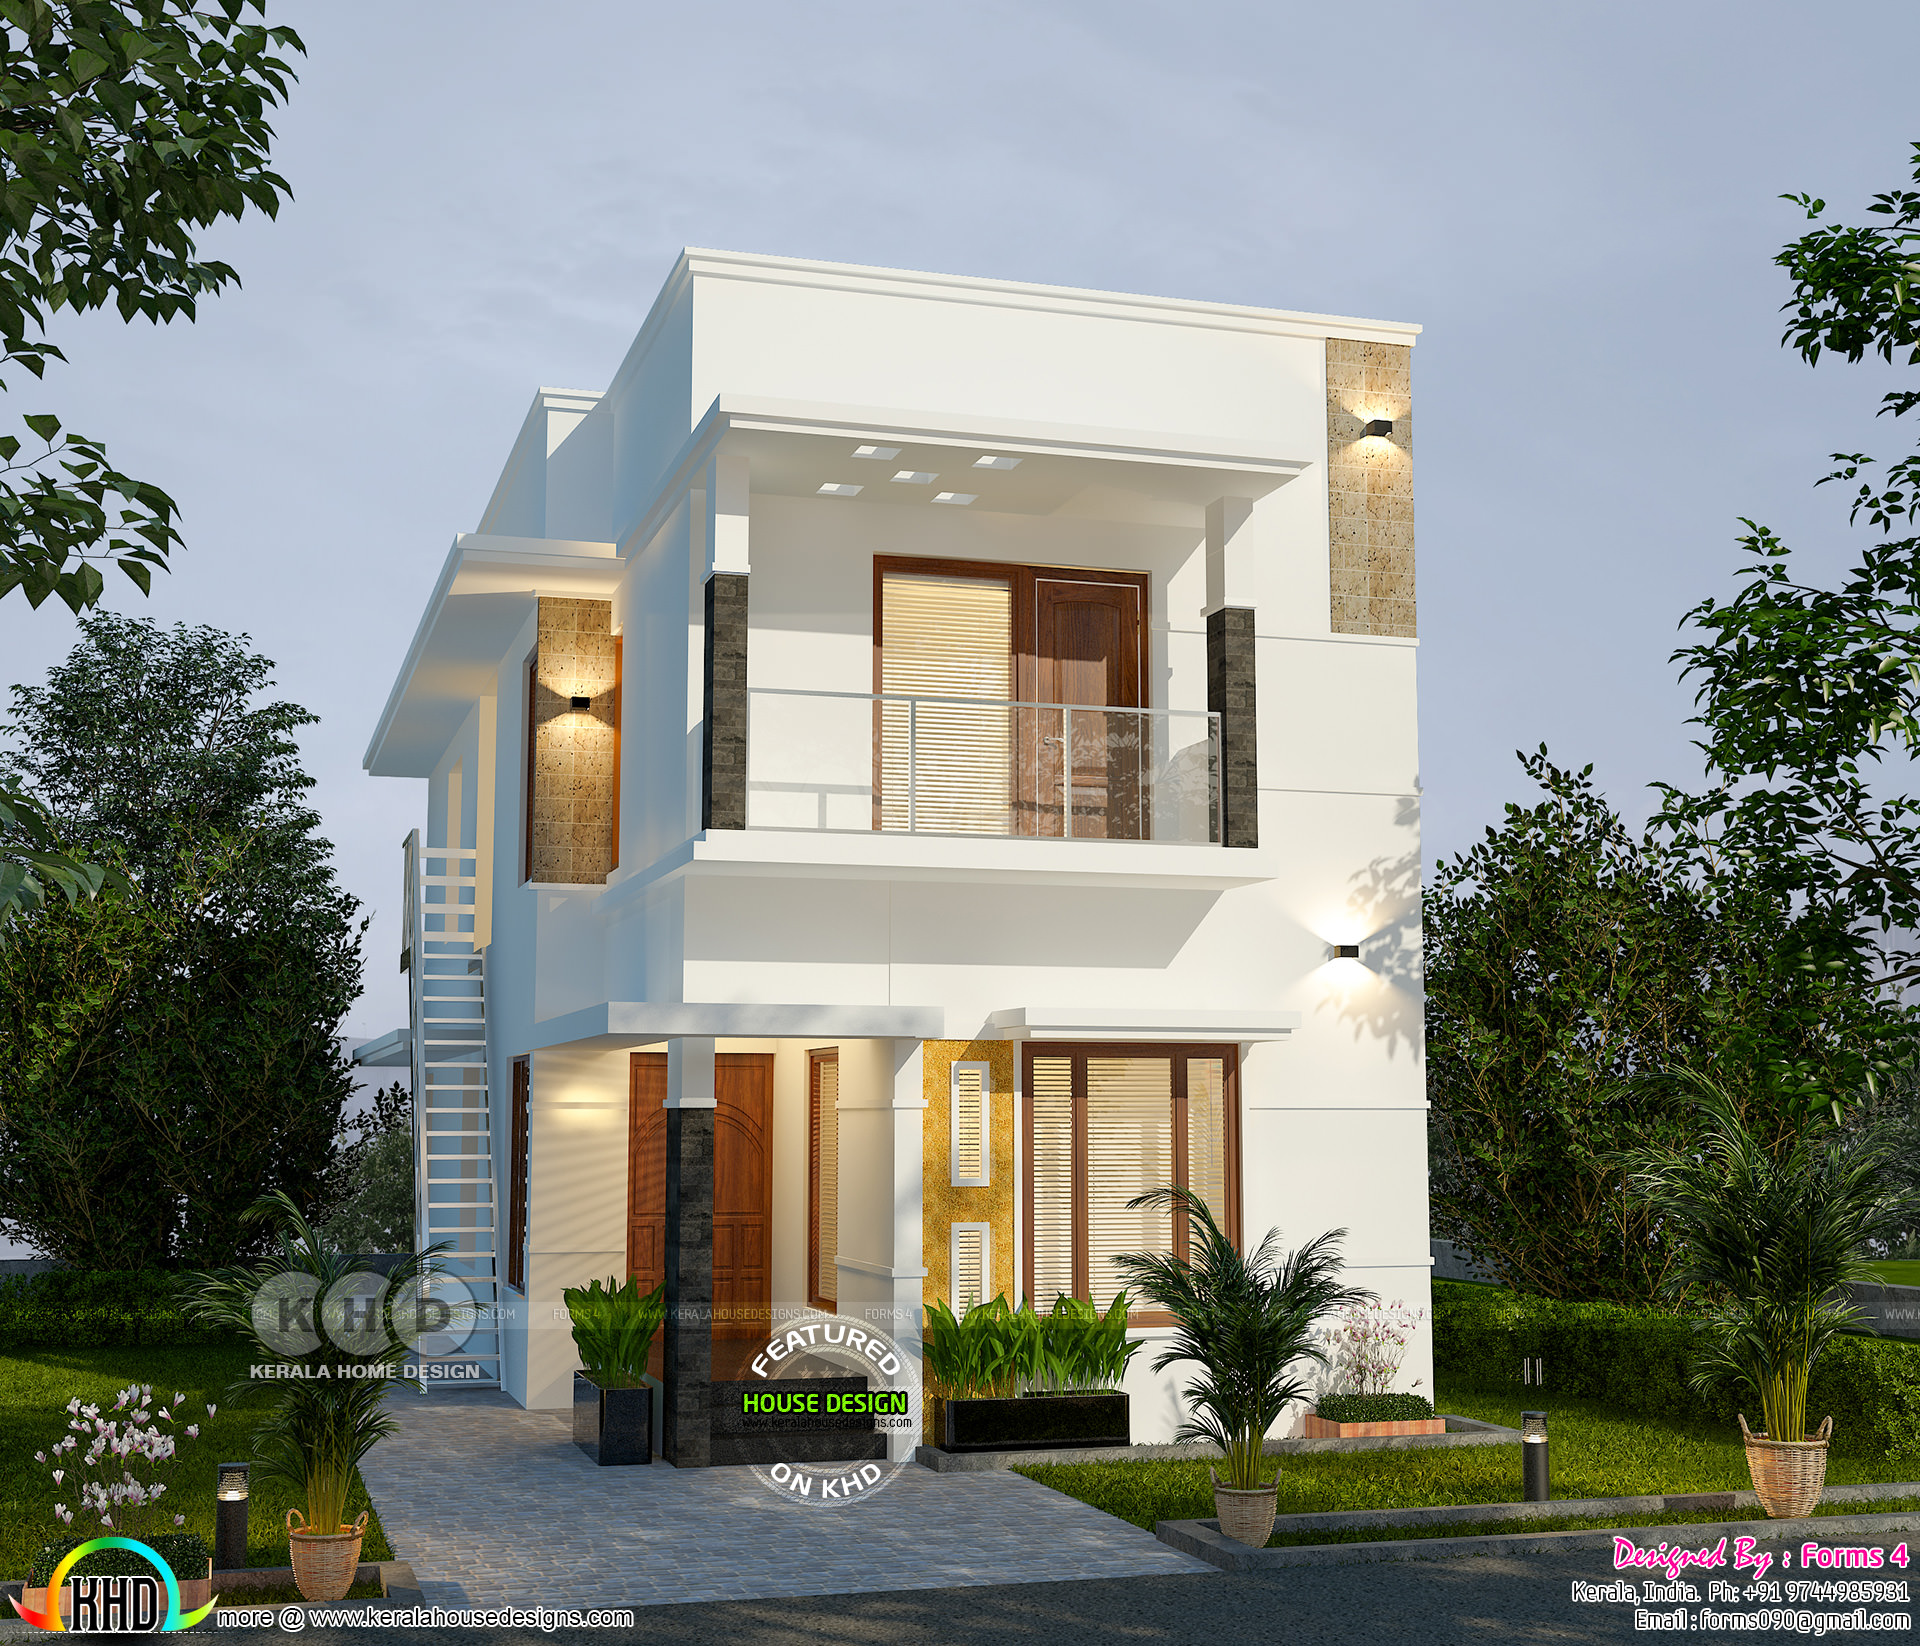 1500 square feet 4 bedroom ₹25 lakhs cost home - Kerala home design and floor plans - 8000+ houses